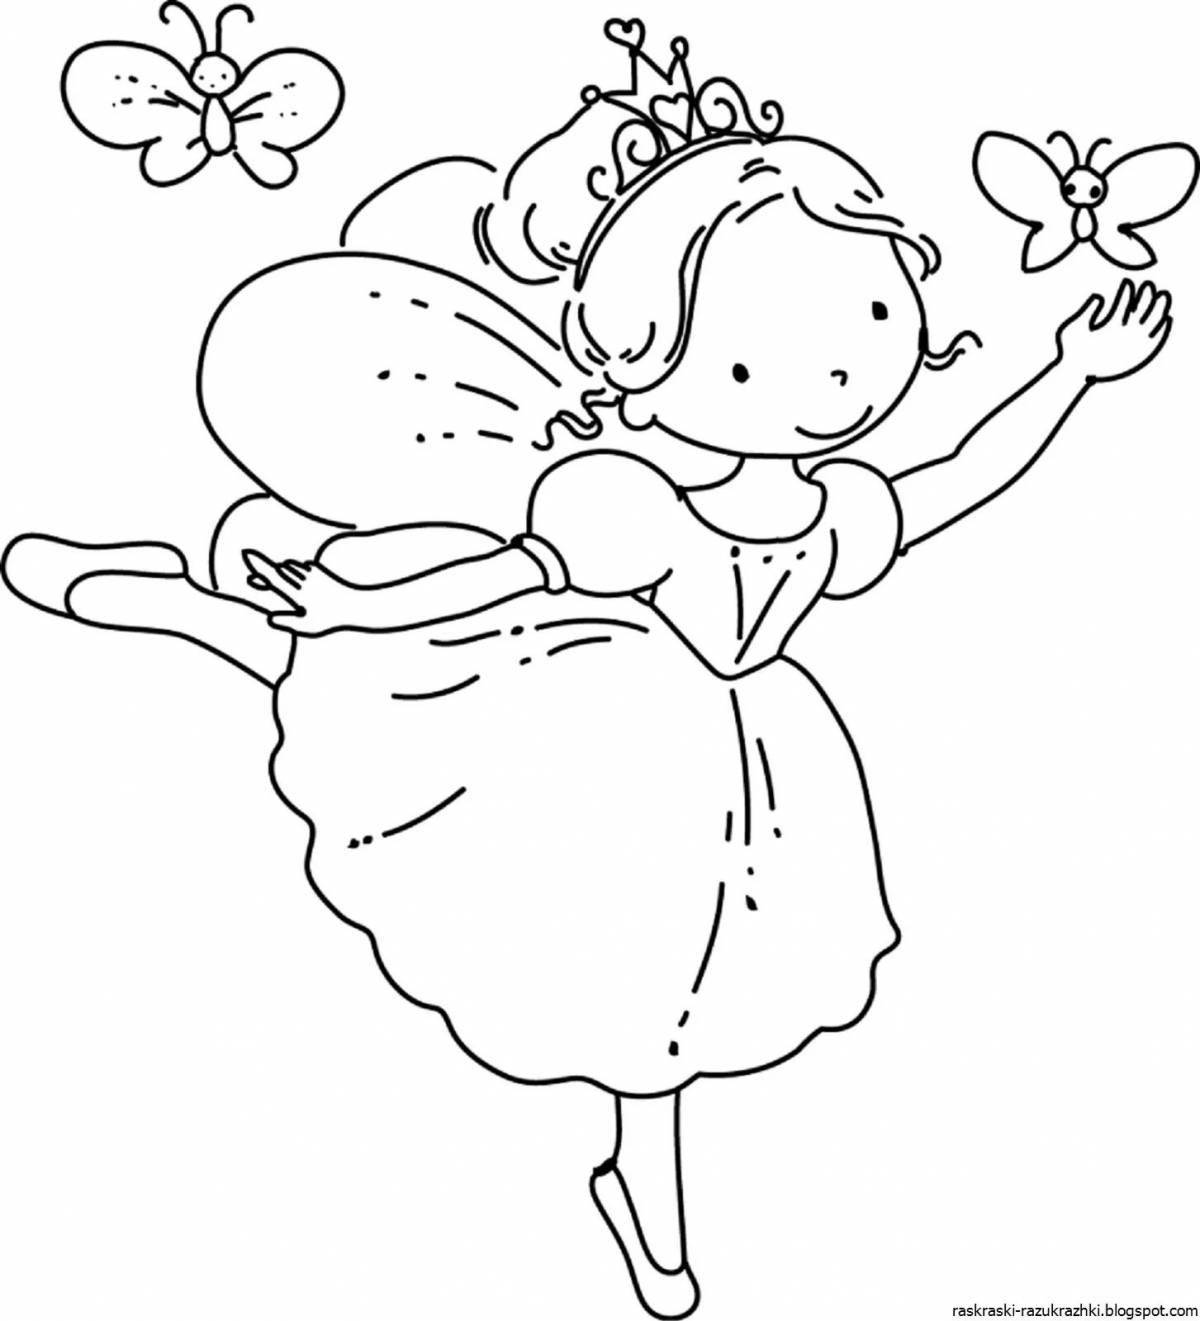 Outstanding coloring book for 3 year old girls, princess